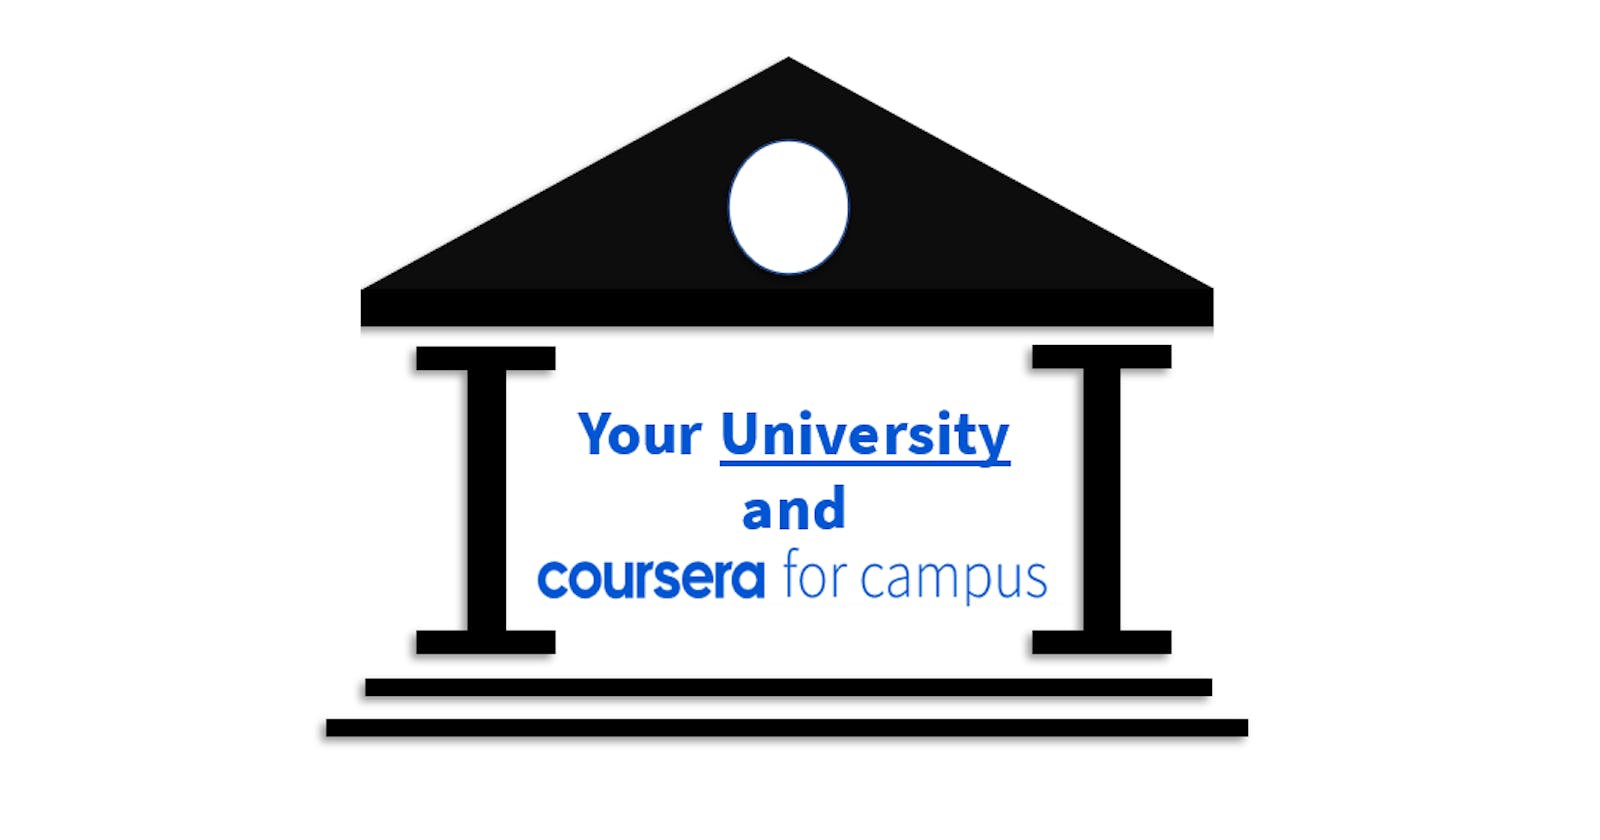 Does Your University Sponsor Courses on Coursera?